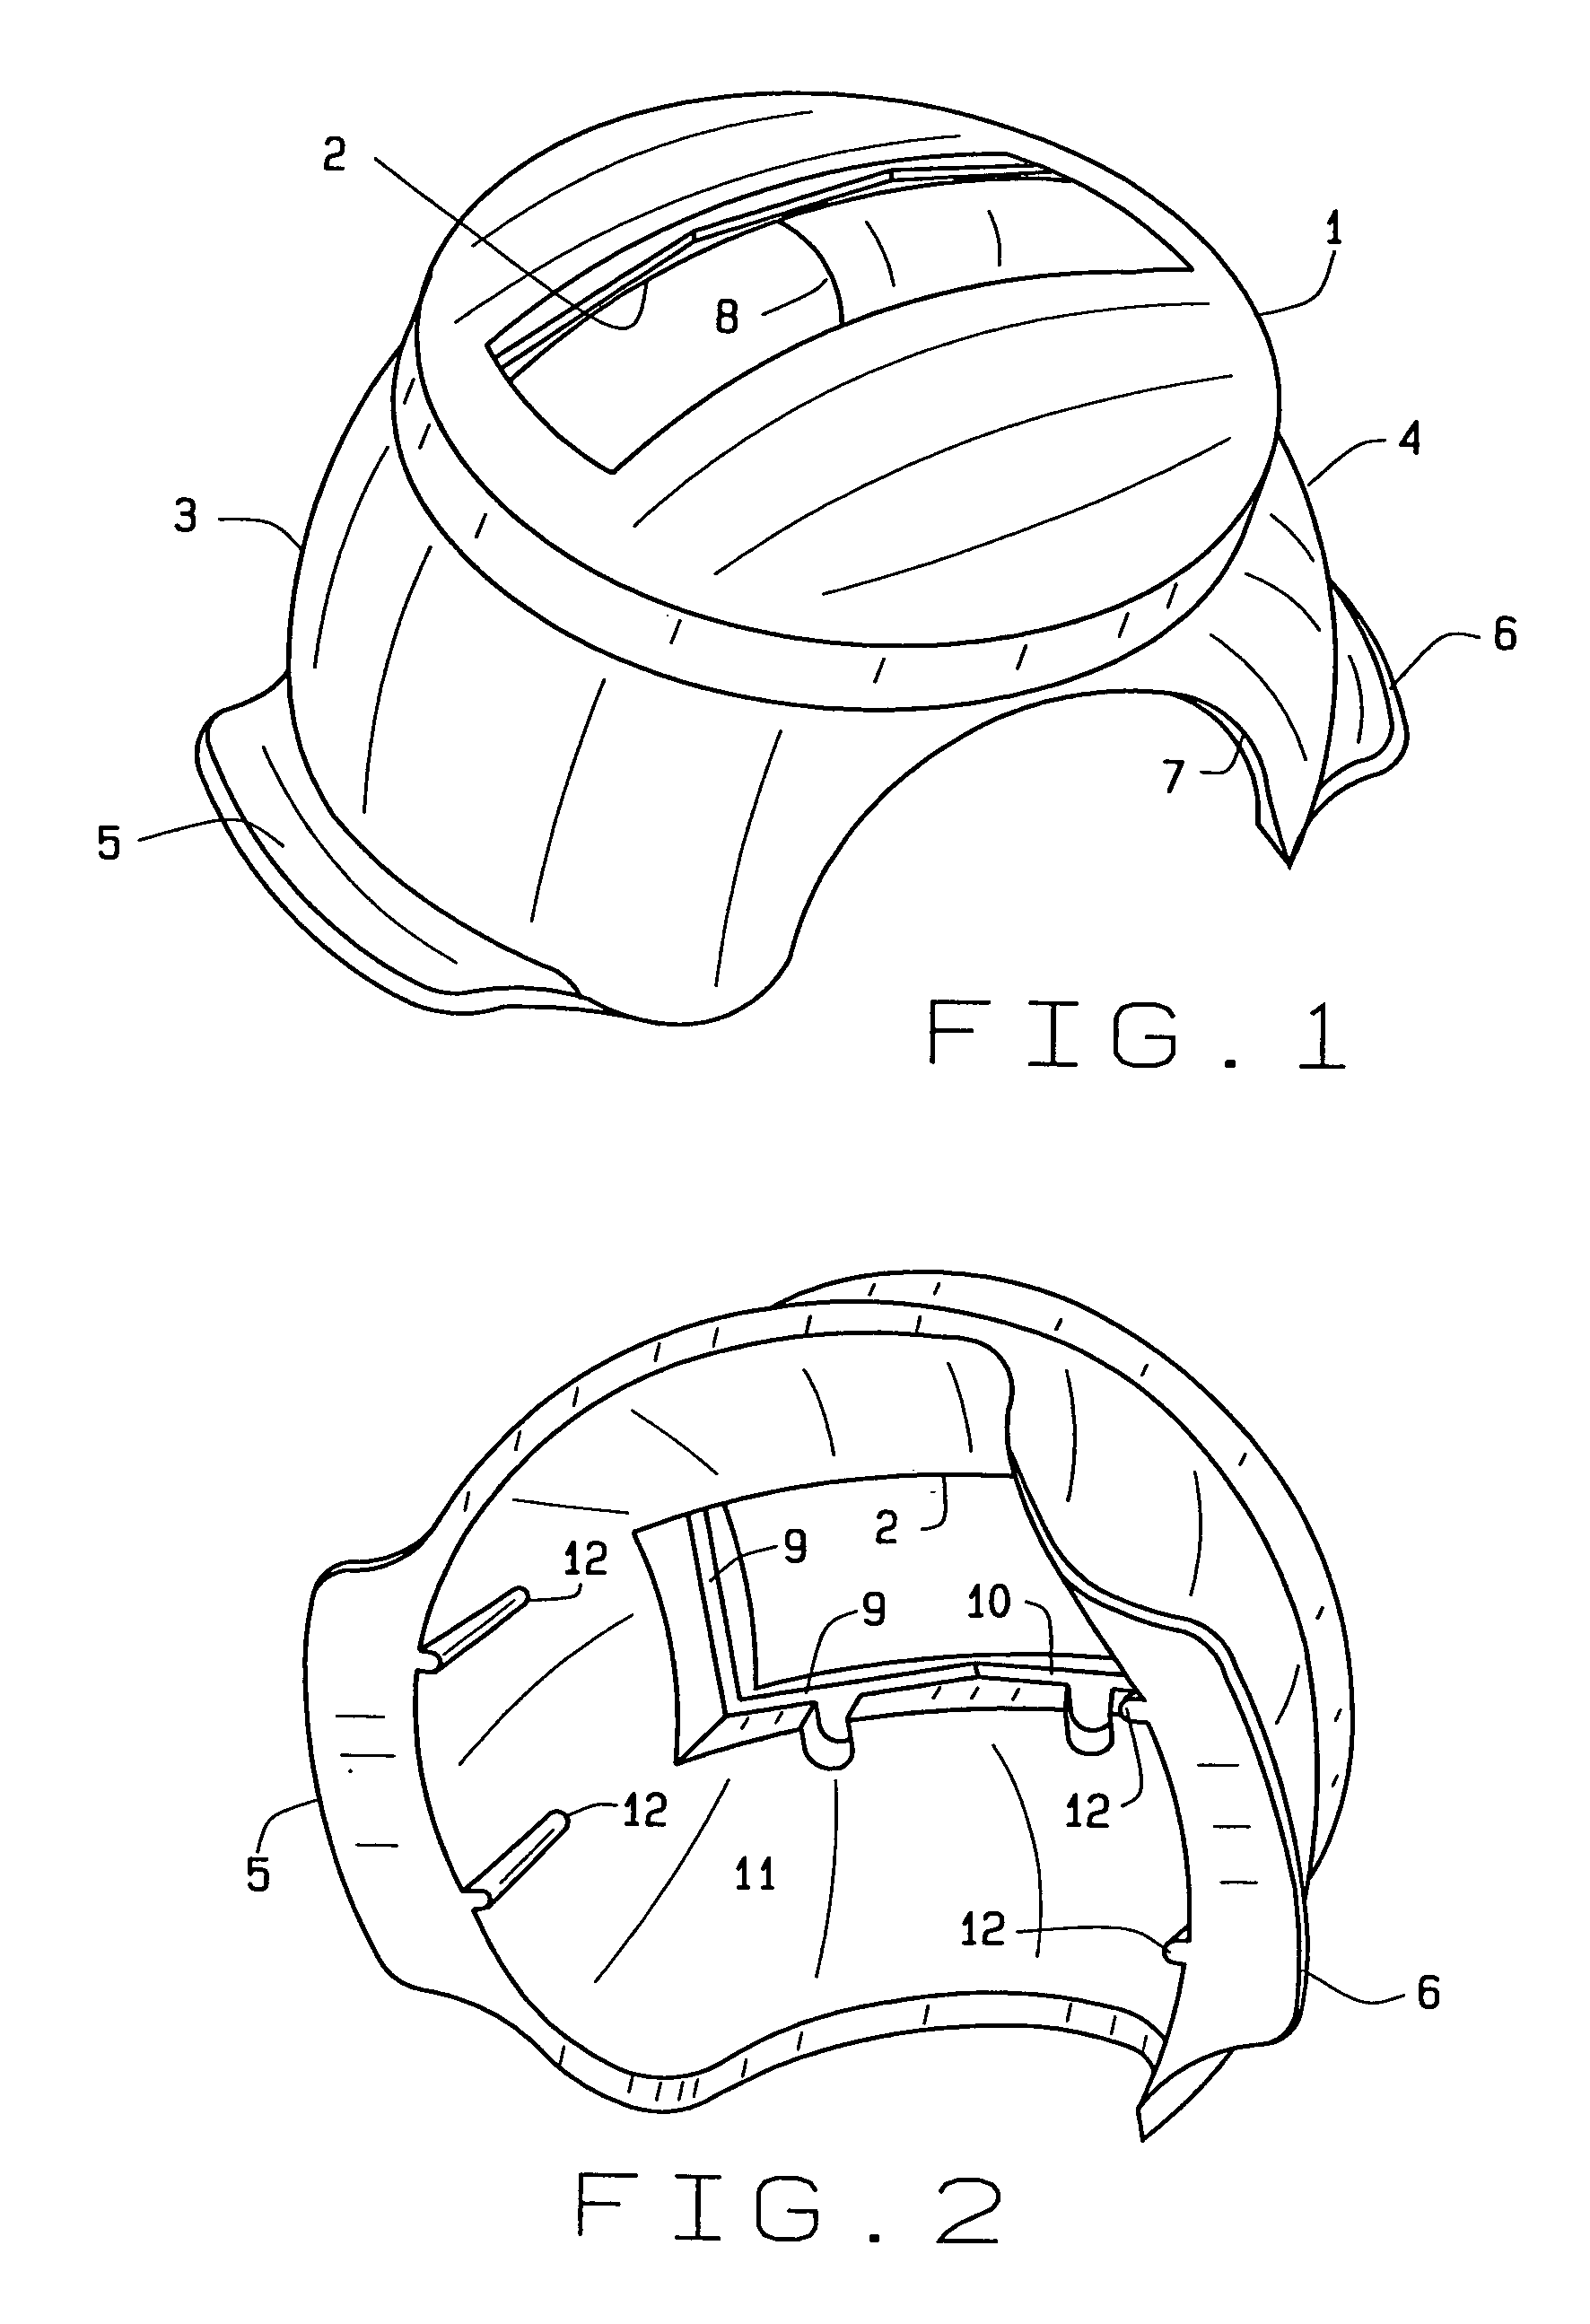 Golf ball initialing device